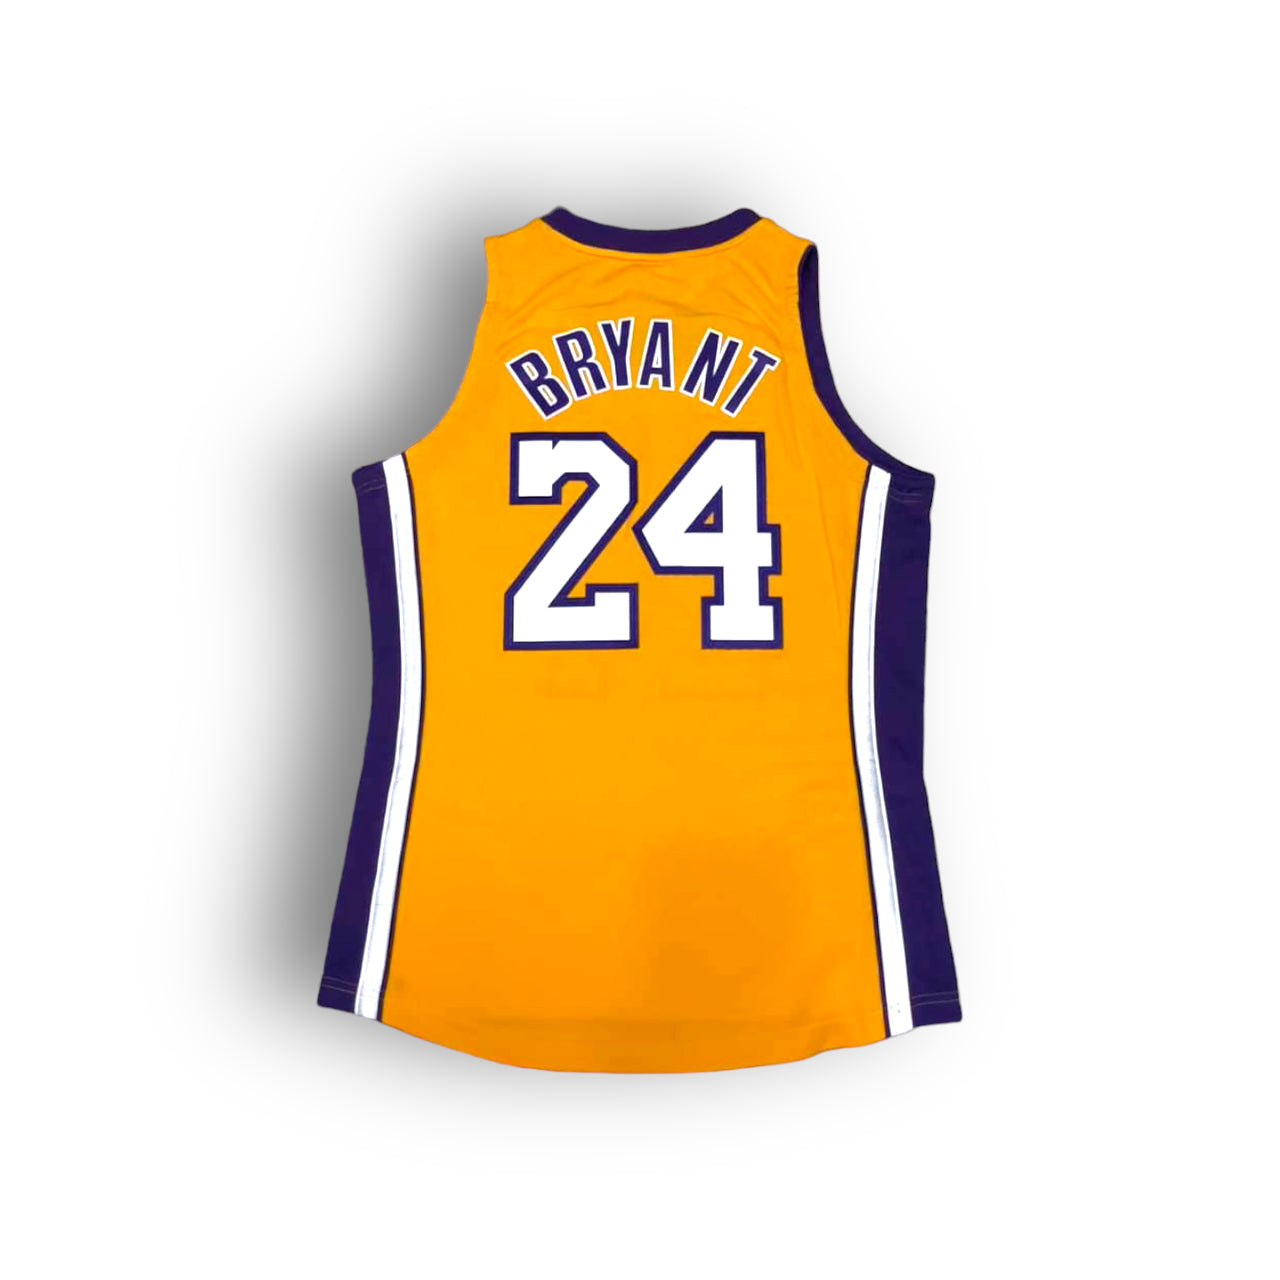 Mitchell and Ness Kobe Bryant Los Angeles Lakers 2009-2010 NBA Finals Home Authentic Jersey - Yellow #24 - Hoop Jersey Store